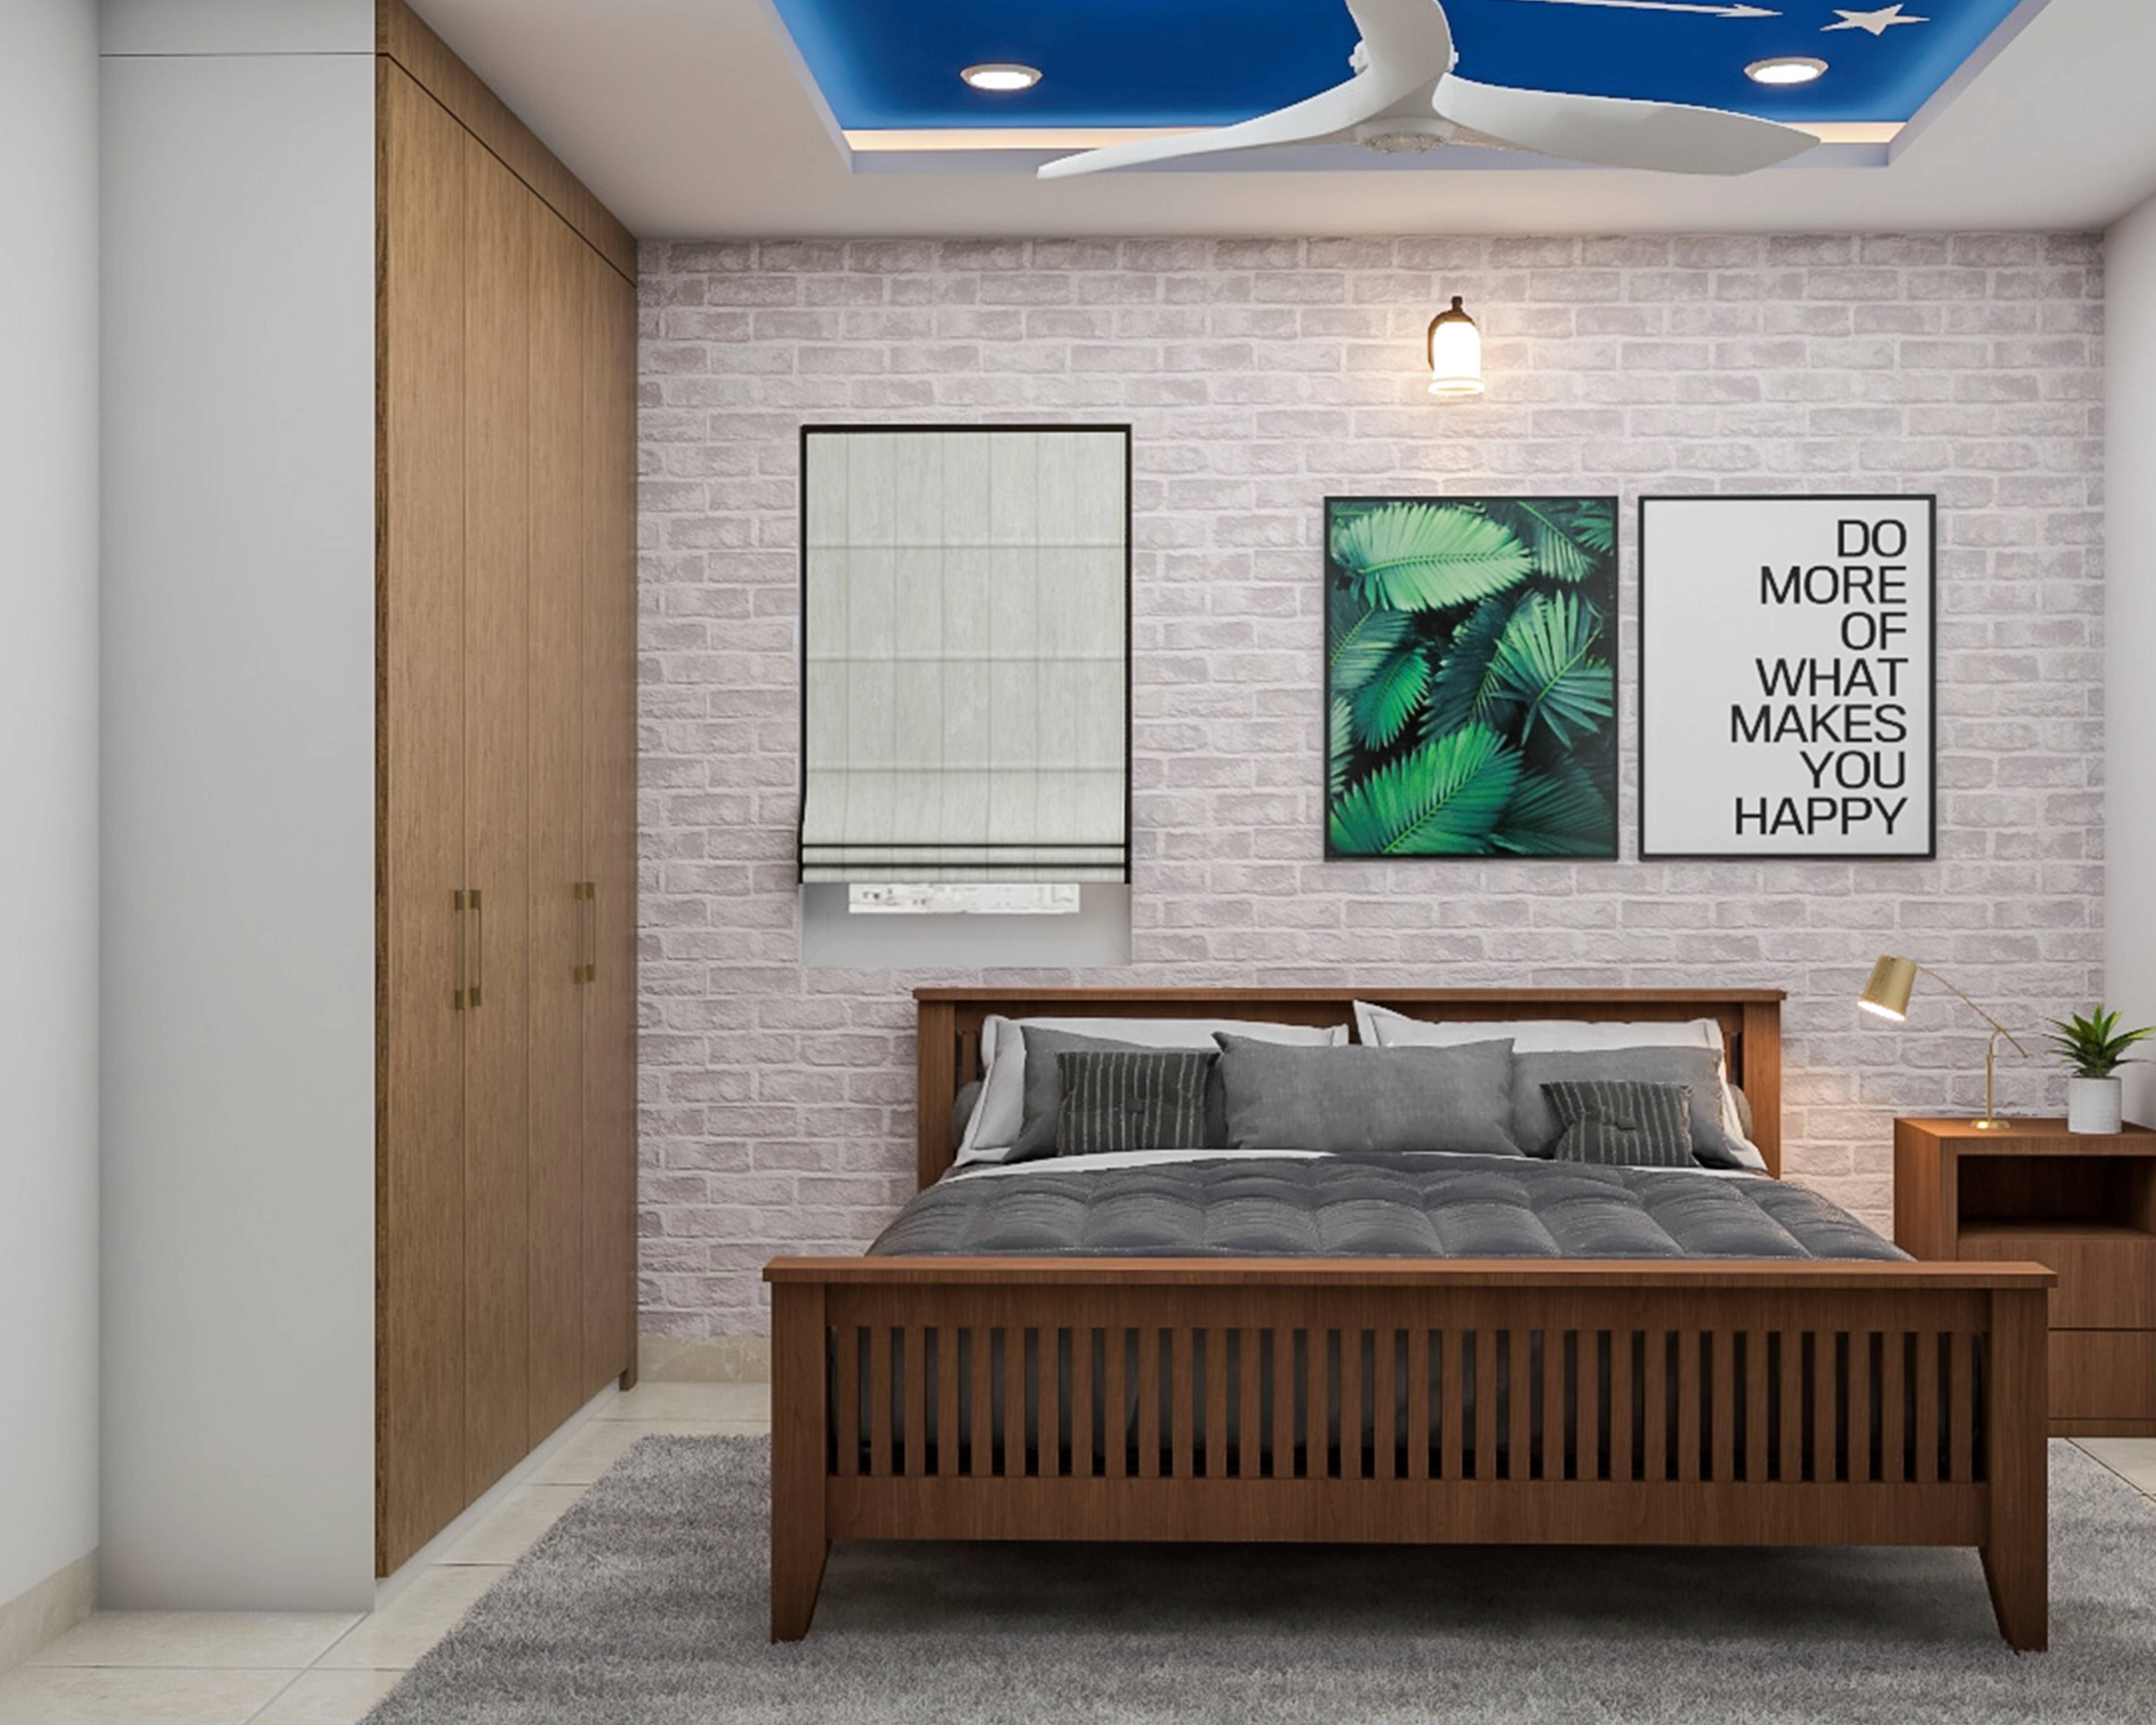 Modern Compact Master Bedroom Design With Wooden Wardrobe